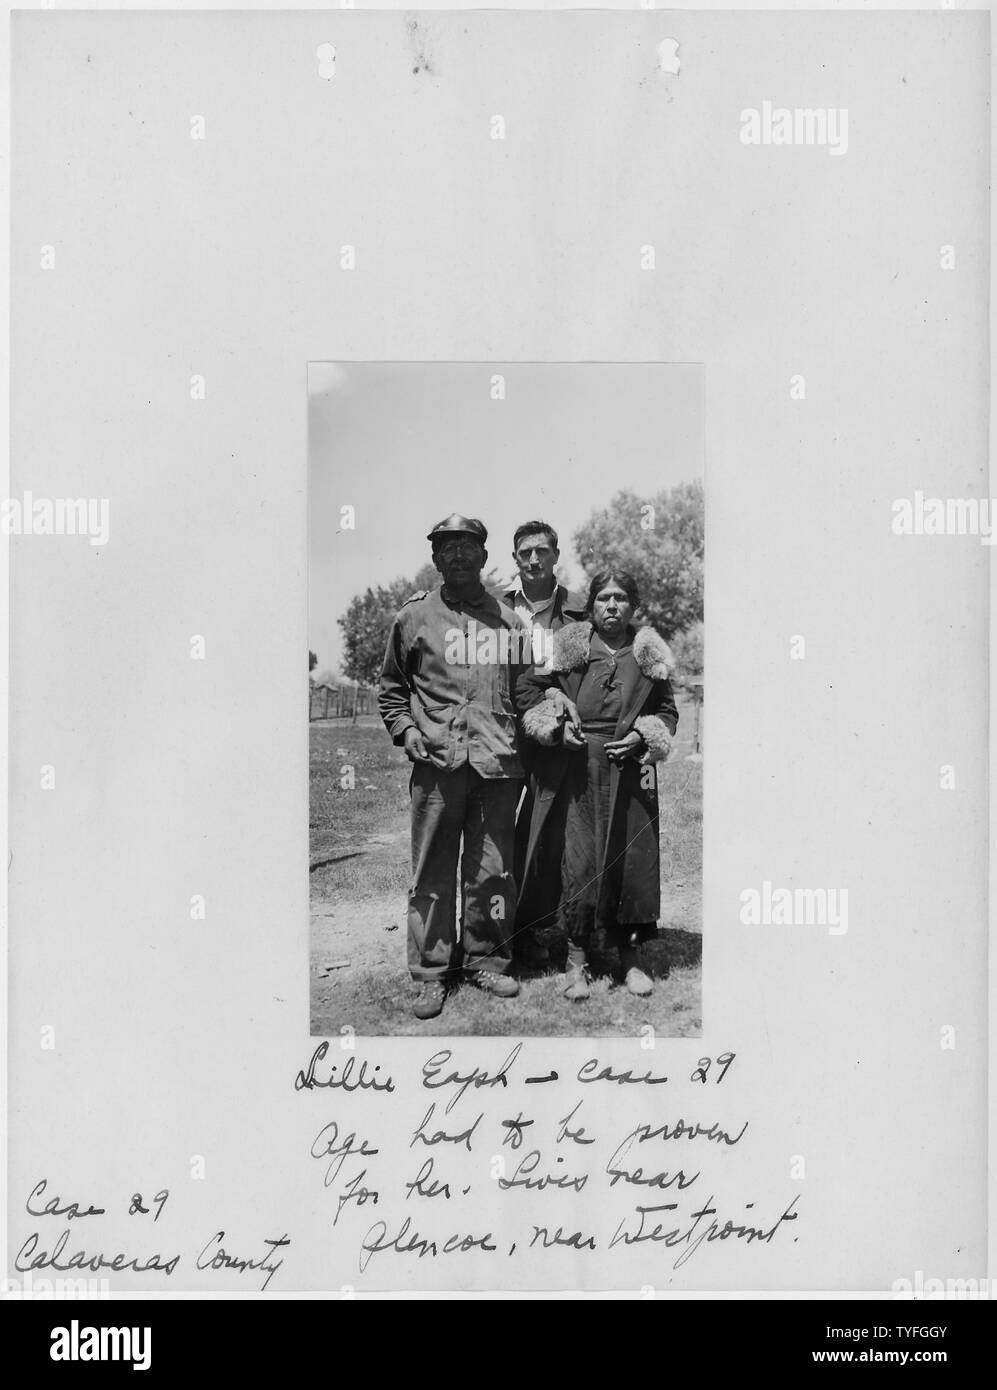 Photograph, with caption, of Lillie Eaph, Calaveras County, California,  from Old Age Security Survey, April 1 to June 30, 1937, Made by Mrs.  Richard Codman, Social Worker, Sacramento Indian Agency, Sacramento, Calif